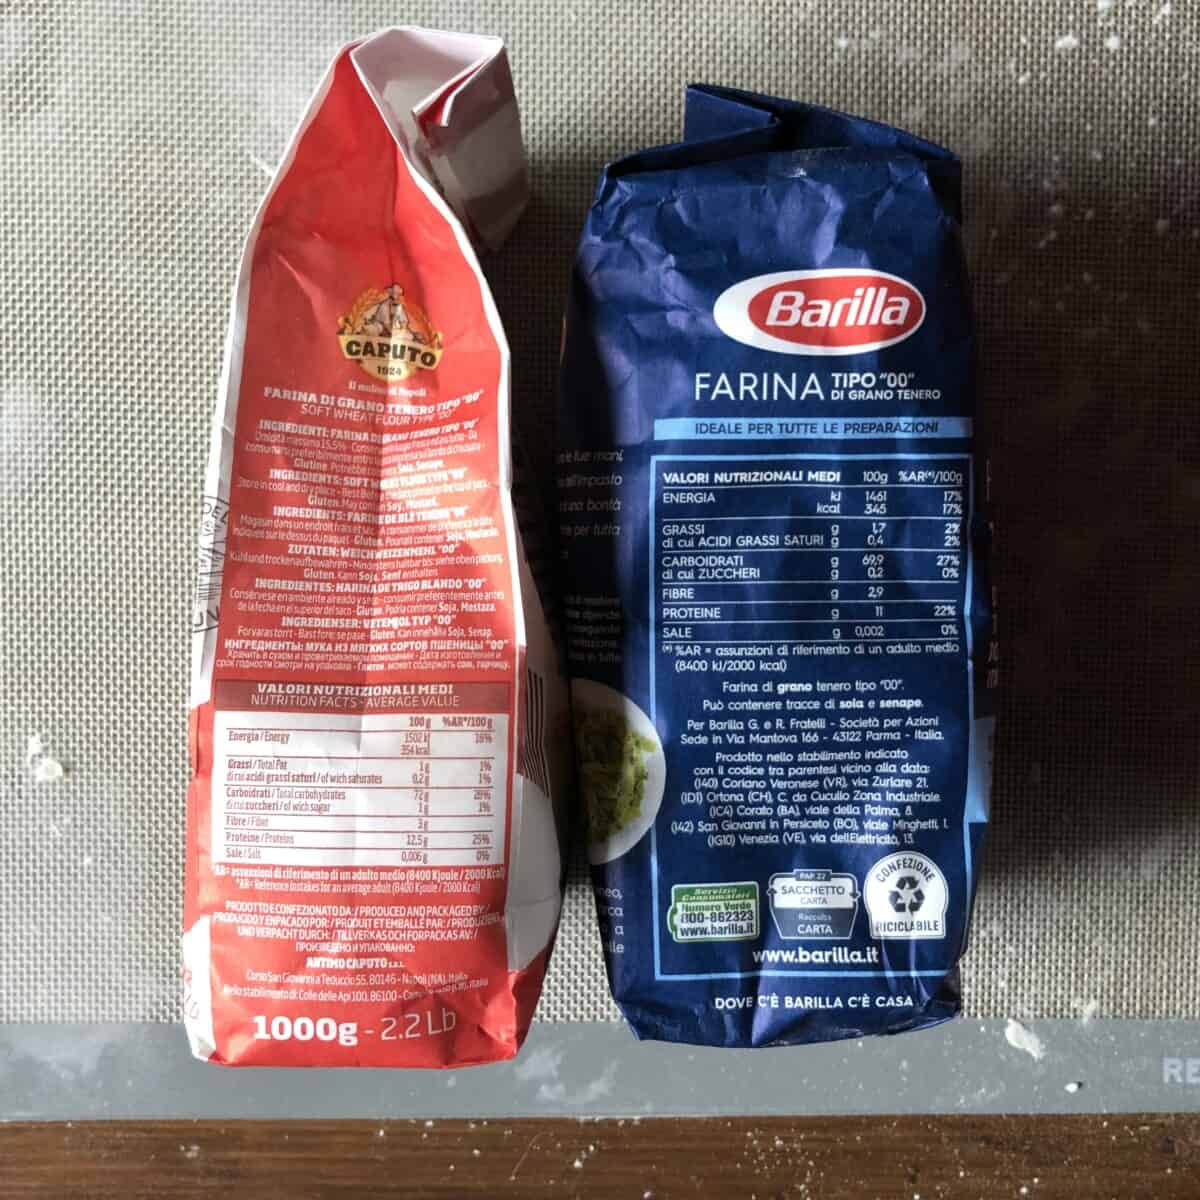 Side view of nutrition labels: Caputo 12.5% protein 00 Italian flour bag on the left and Barilla 11% 00 Italian flour bag on the right